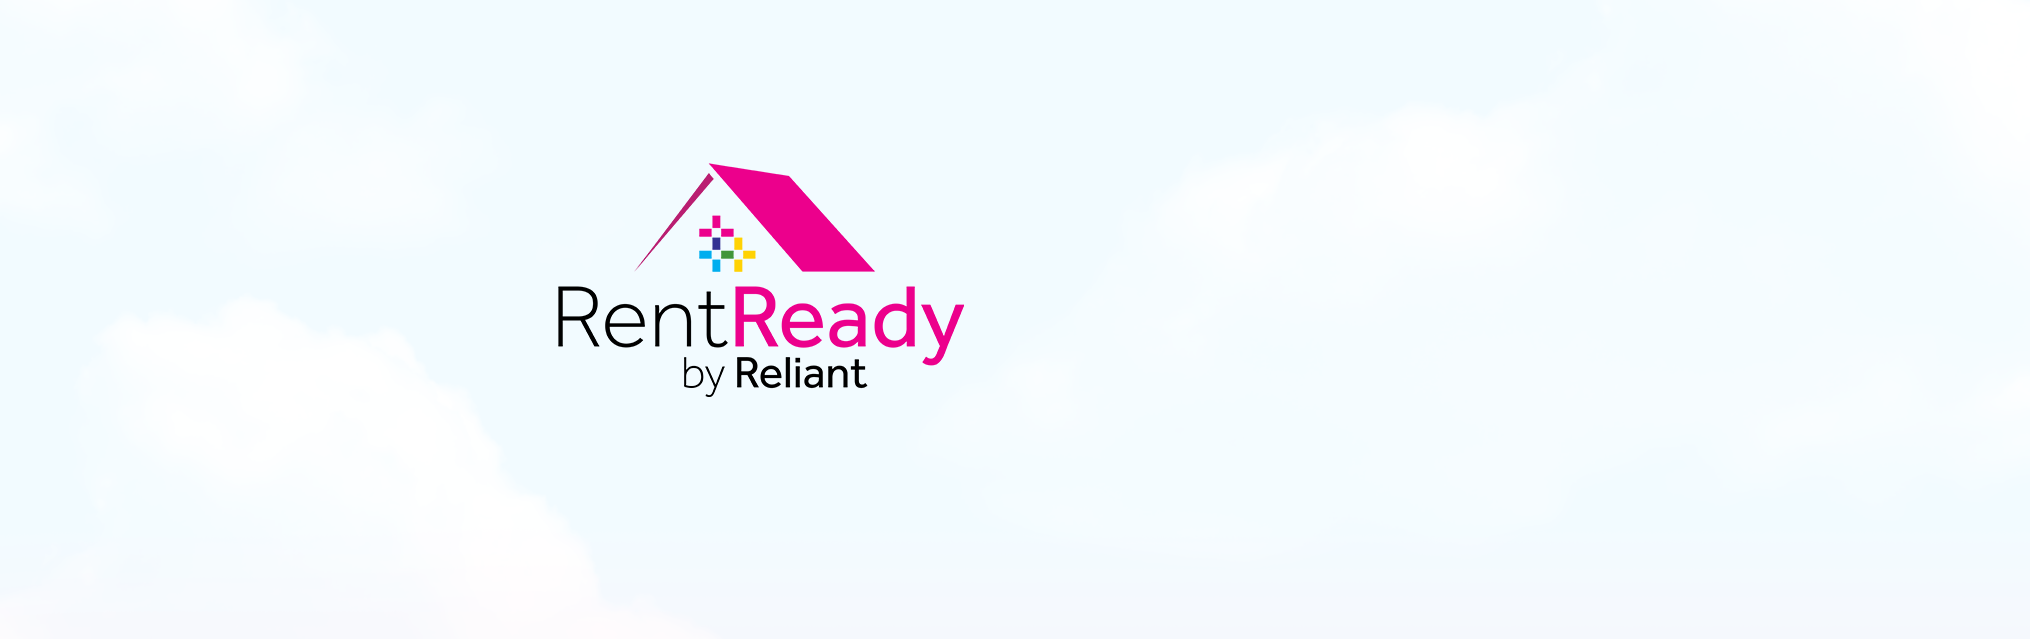 RentReady by Reliant - Apartment 12 plan
